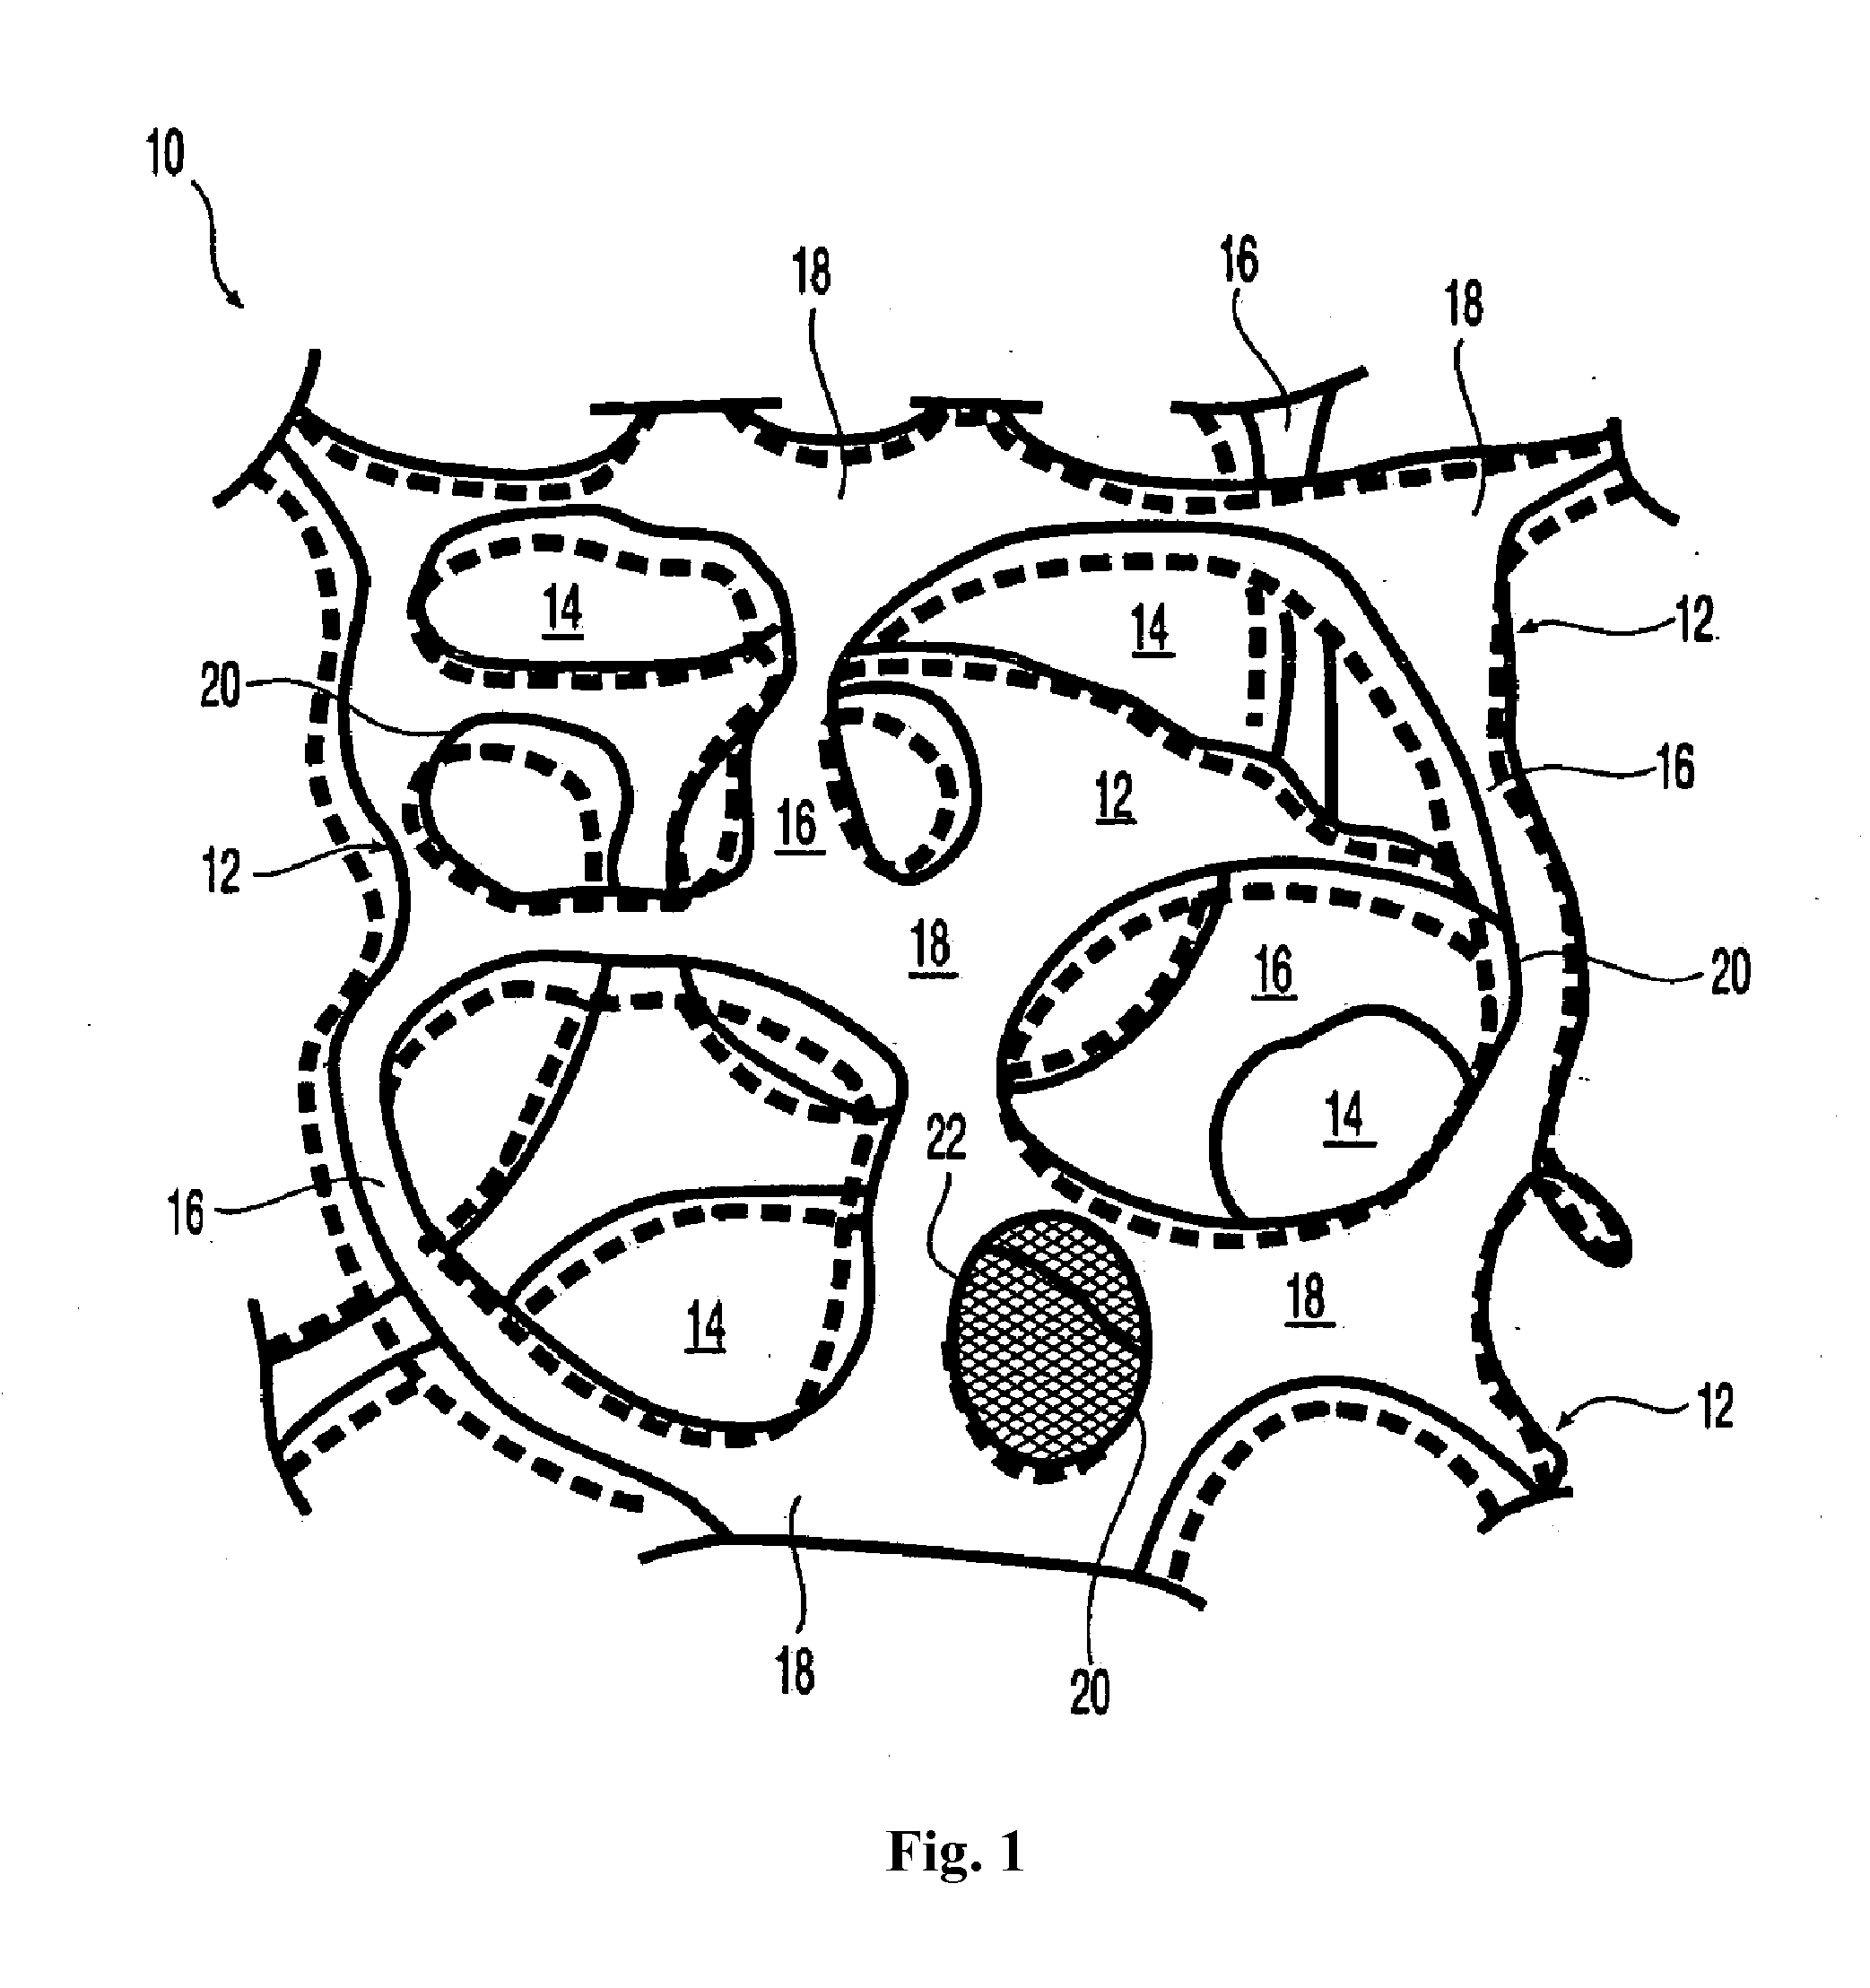 Composite mesh devices and methods for soft tissue repair